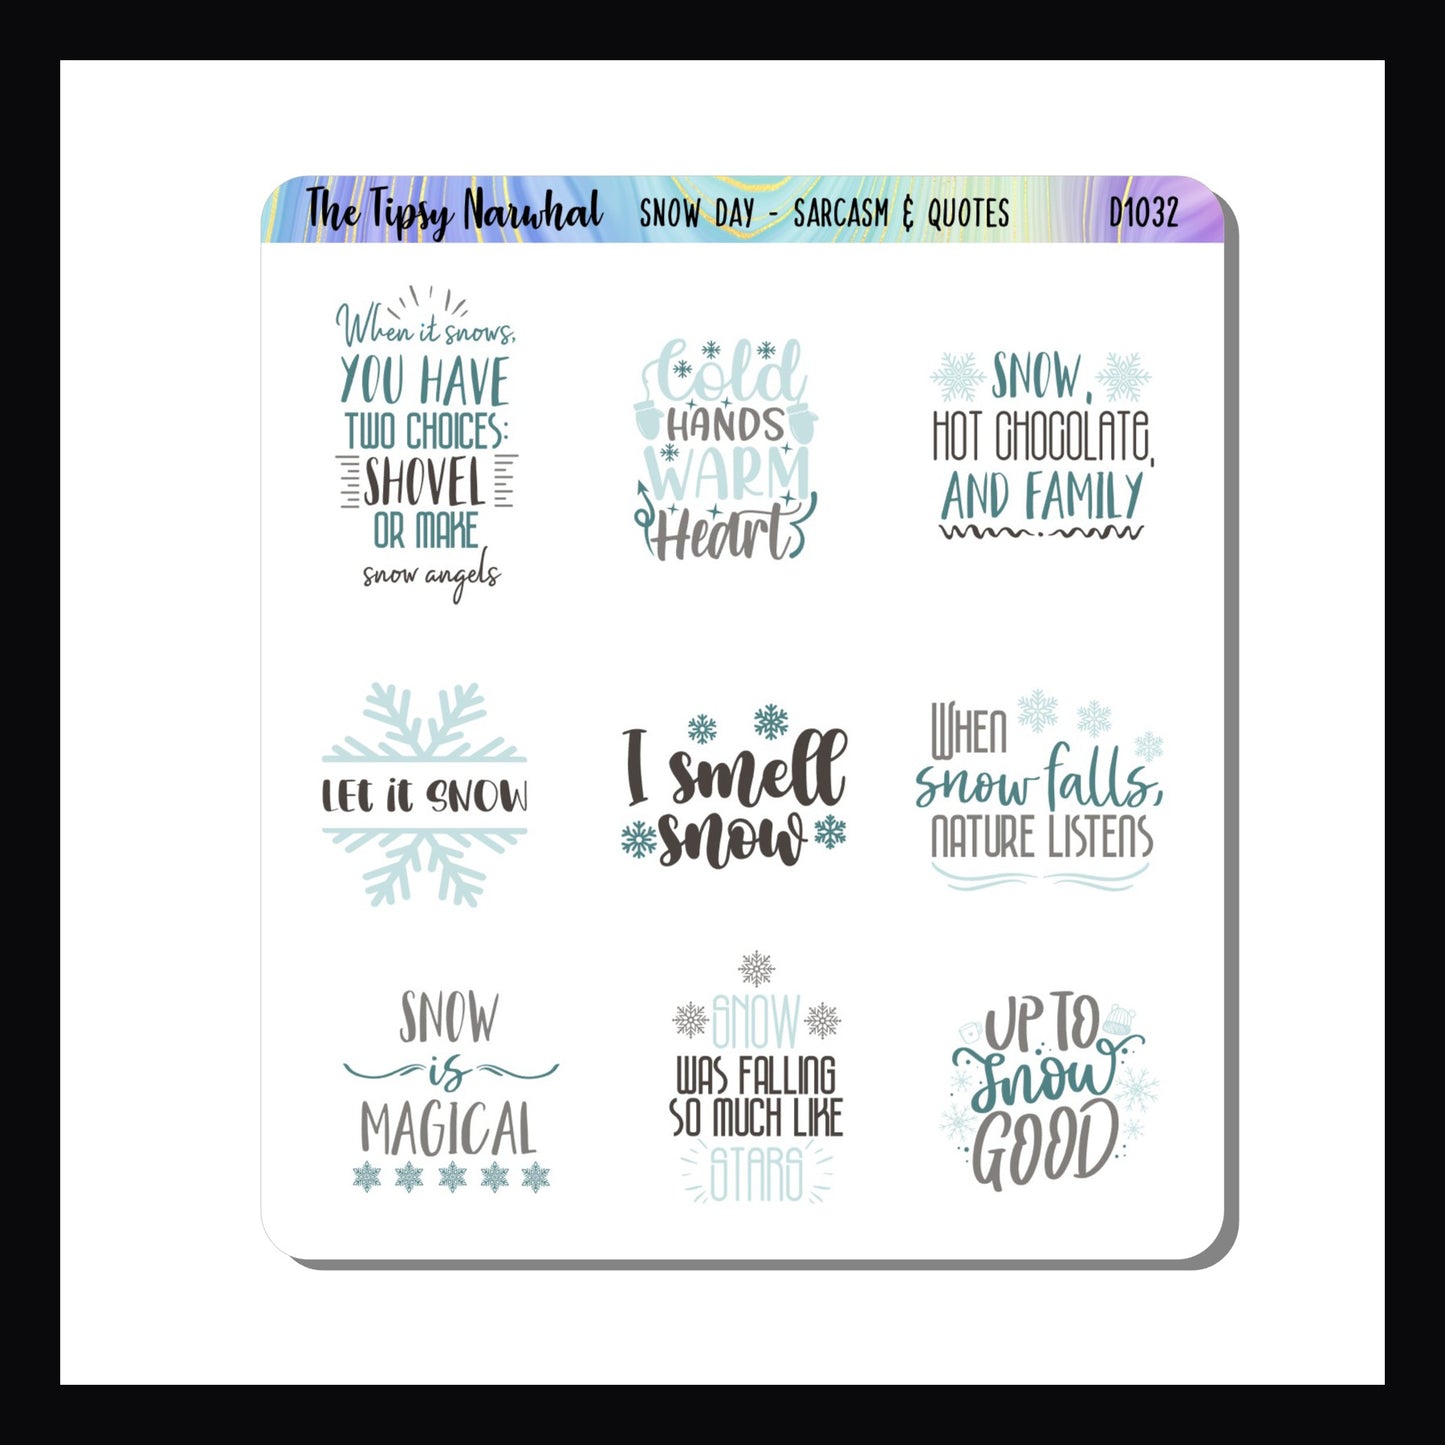 Snow Day Sarcasm and Quotes sticker sheet.  Sheet features 9 different quote stickers about snow, winter and the cold.